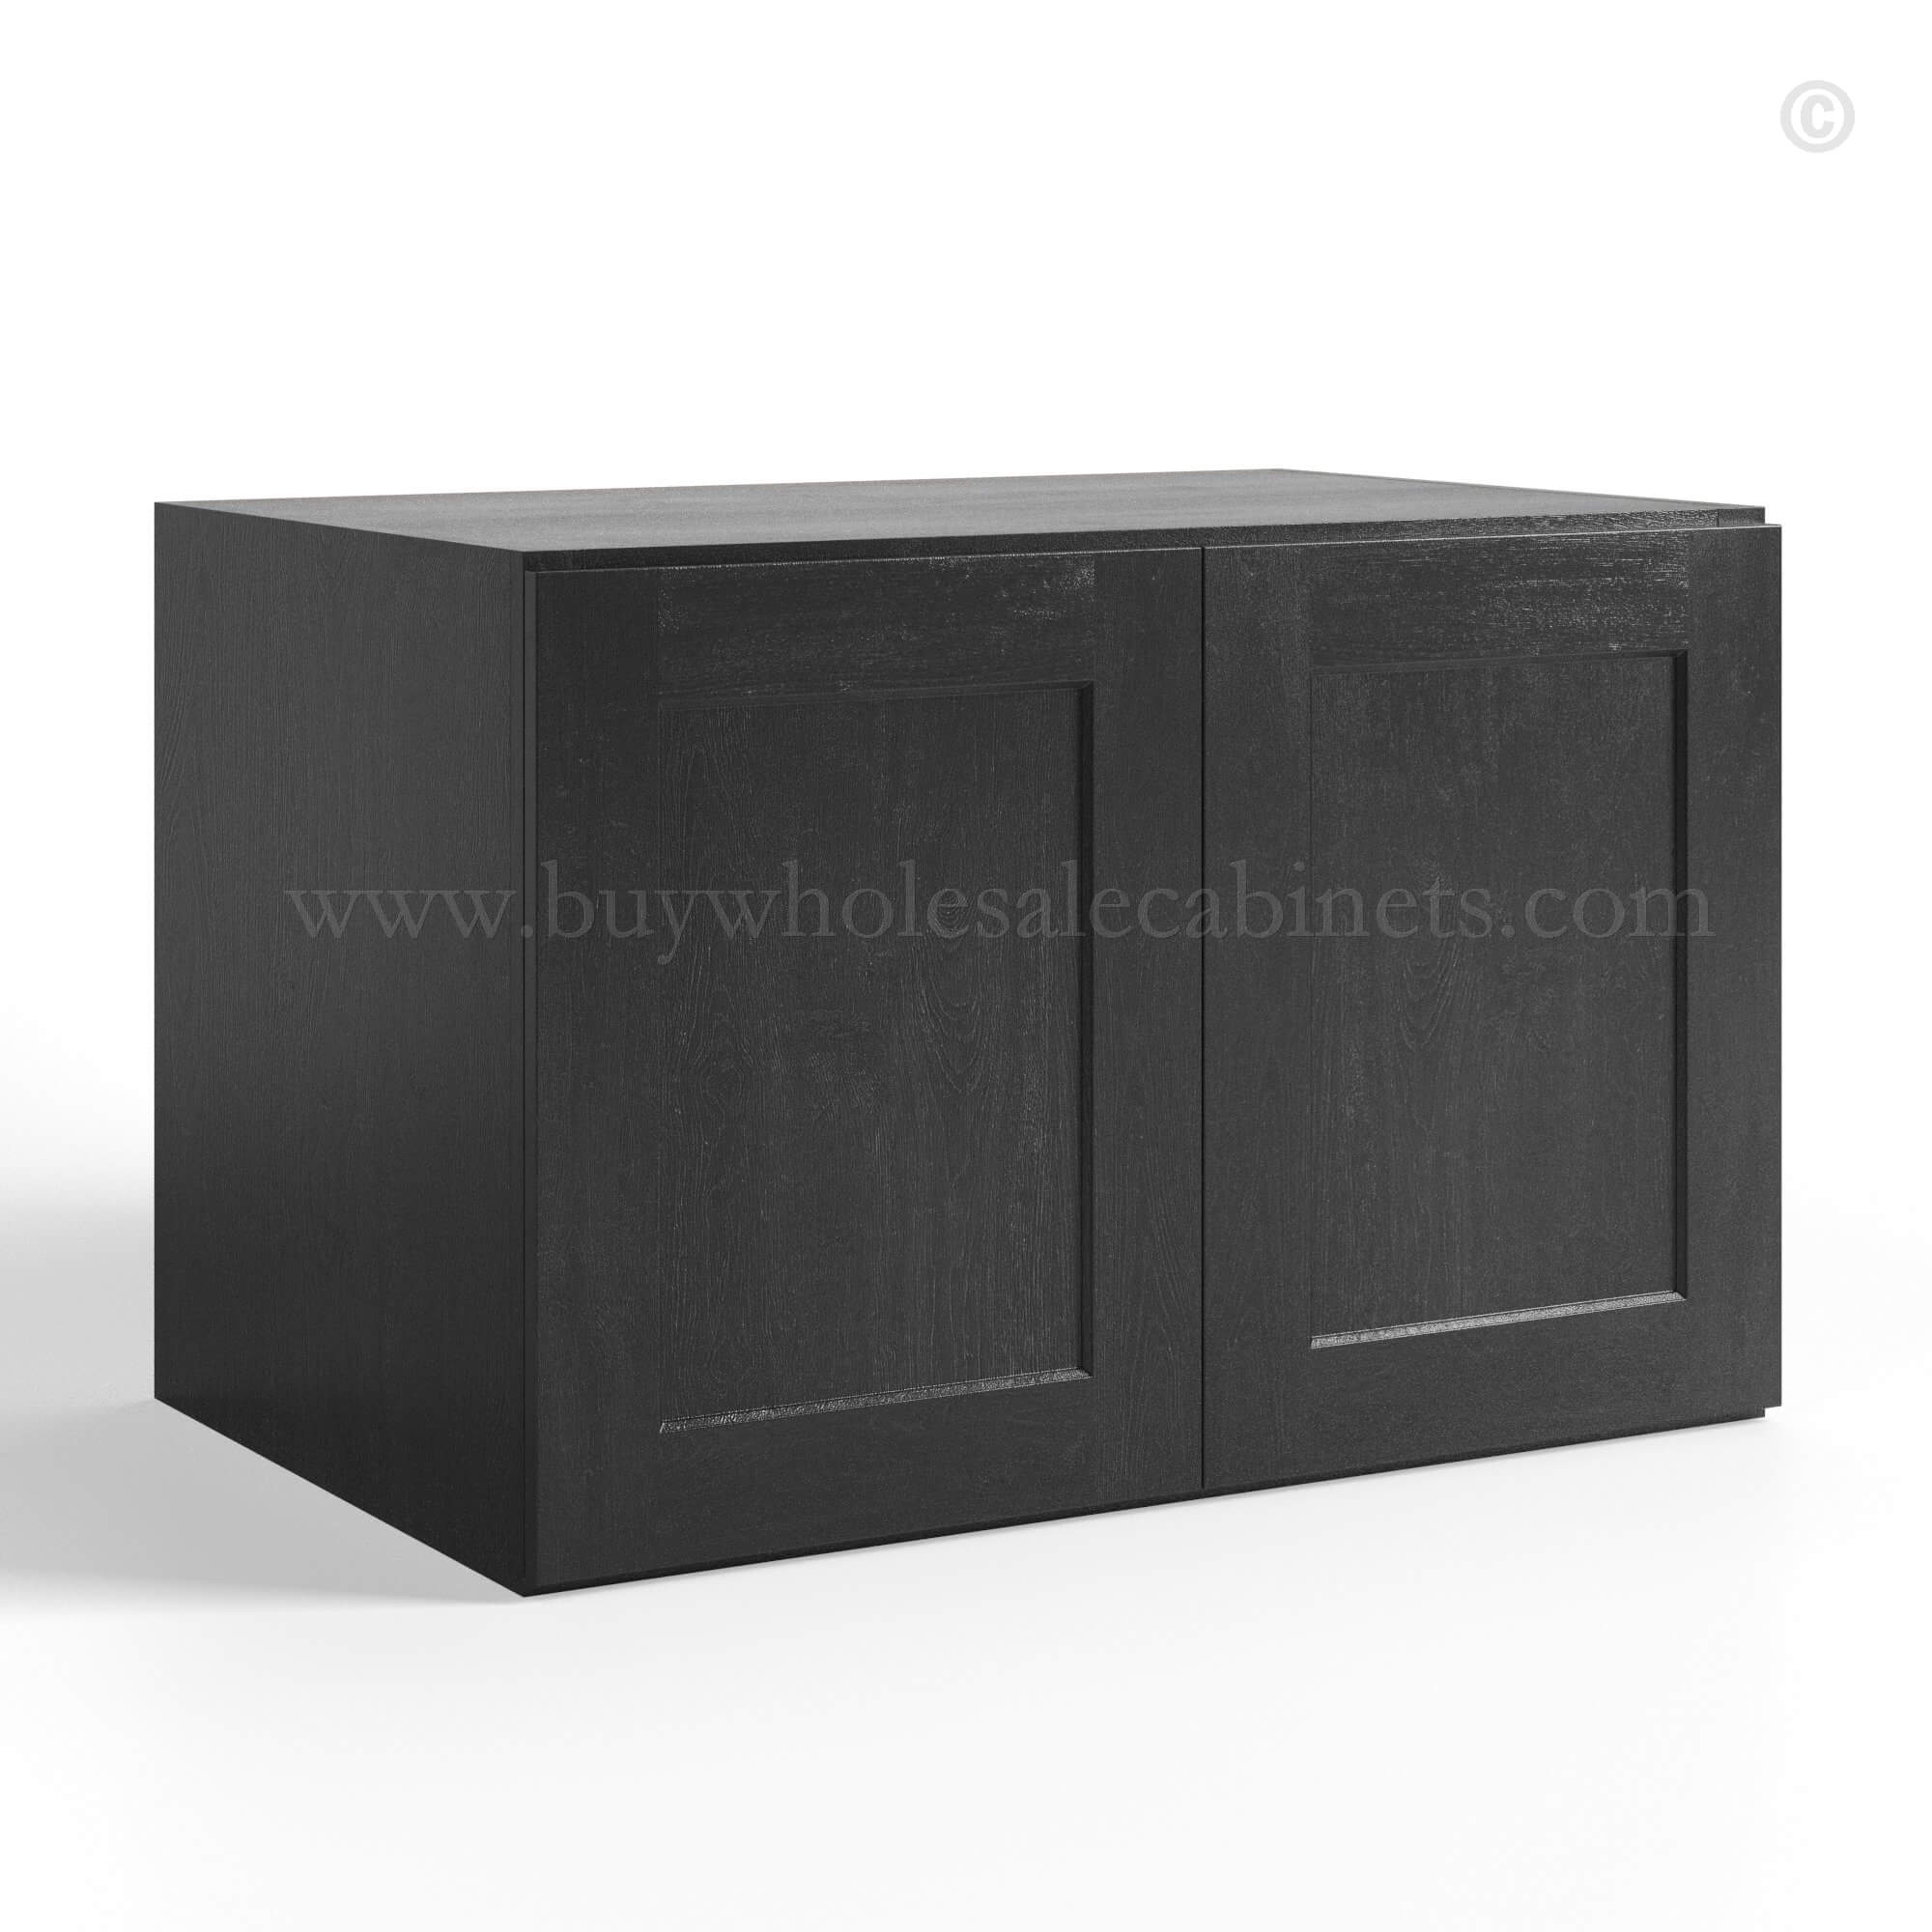 Charcoal Black Shaker Double Door Wall Cabinets, rta cabinets, wholesale cabinets